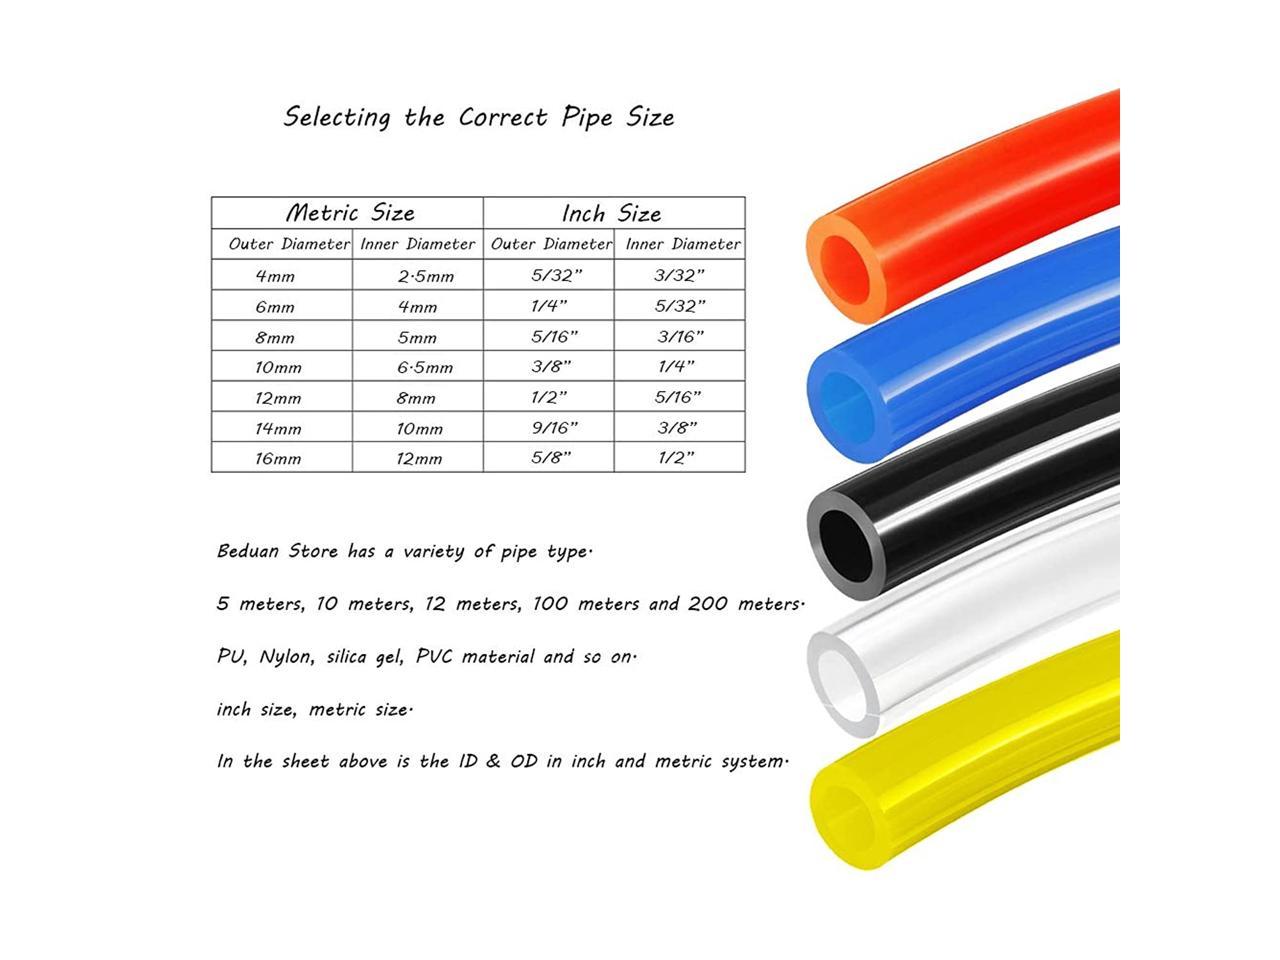 Outer Diameter 3/8-5 ft Inner Diameter 5/16 Hard Bendable Sever-Temperature Yellow Opaque Plastic Tubing for Chemical Applications 